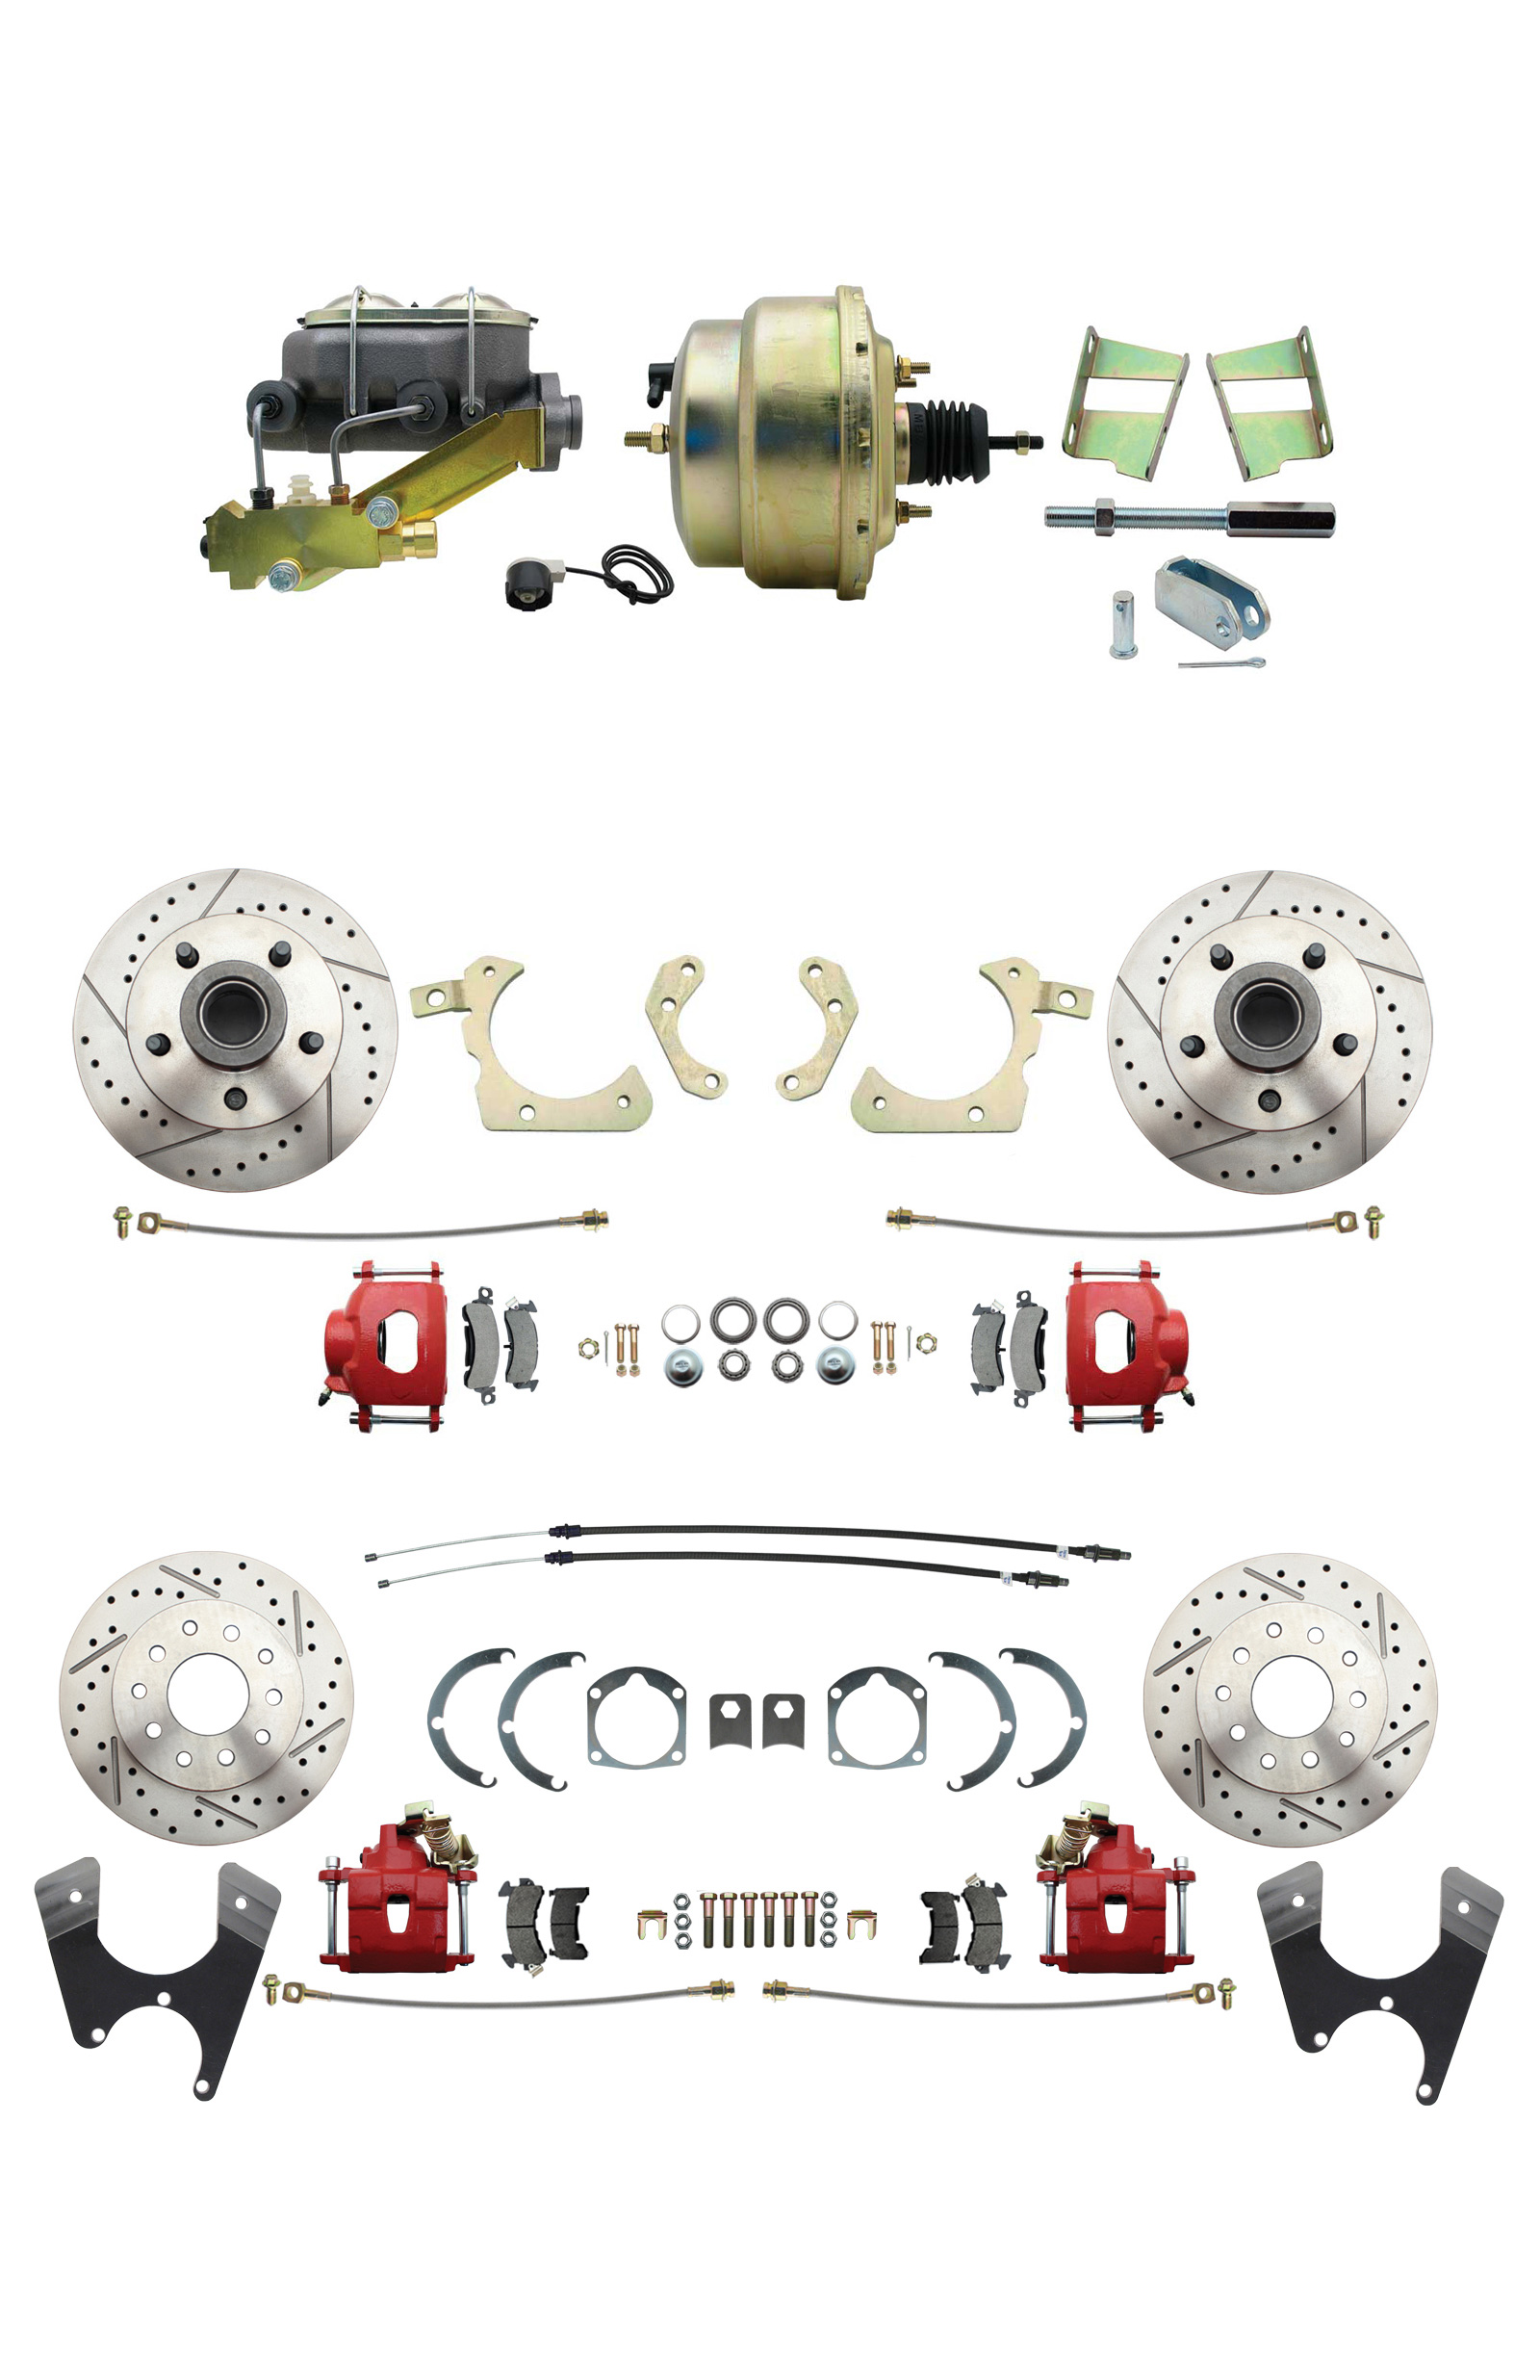 1959-1964 GM Full Size Front & Rear Power Disc Brake Kit Red Powder Coated Calipers Drilled/Slotted Rotors (Impala, Bel Air, Biscayne) & 8 Dual Zinc Booster Conversion Kit W/ Cast Iron Master Cylinder Left Mount Disc/ D